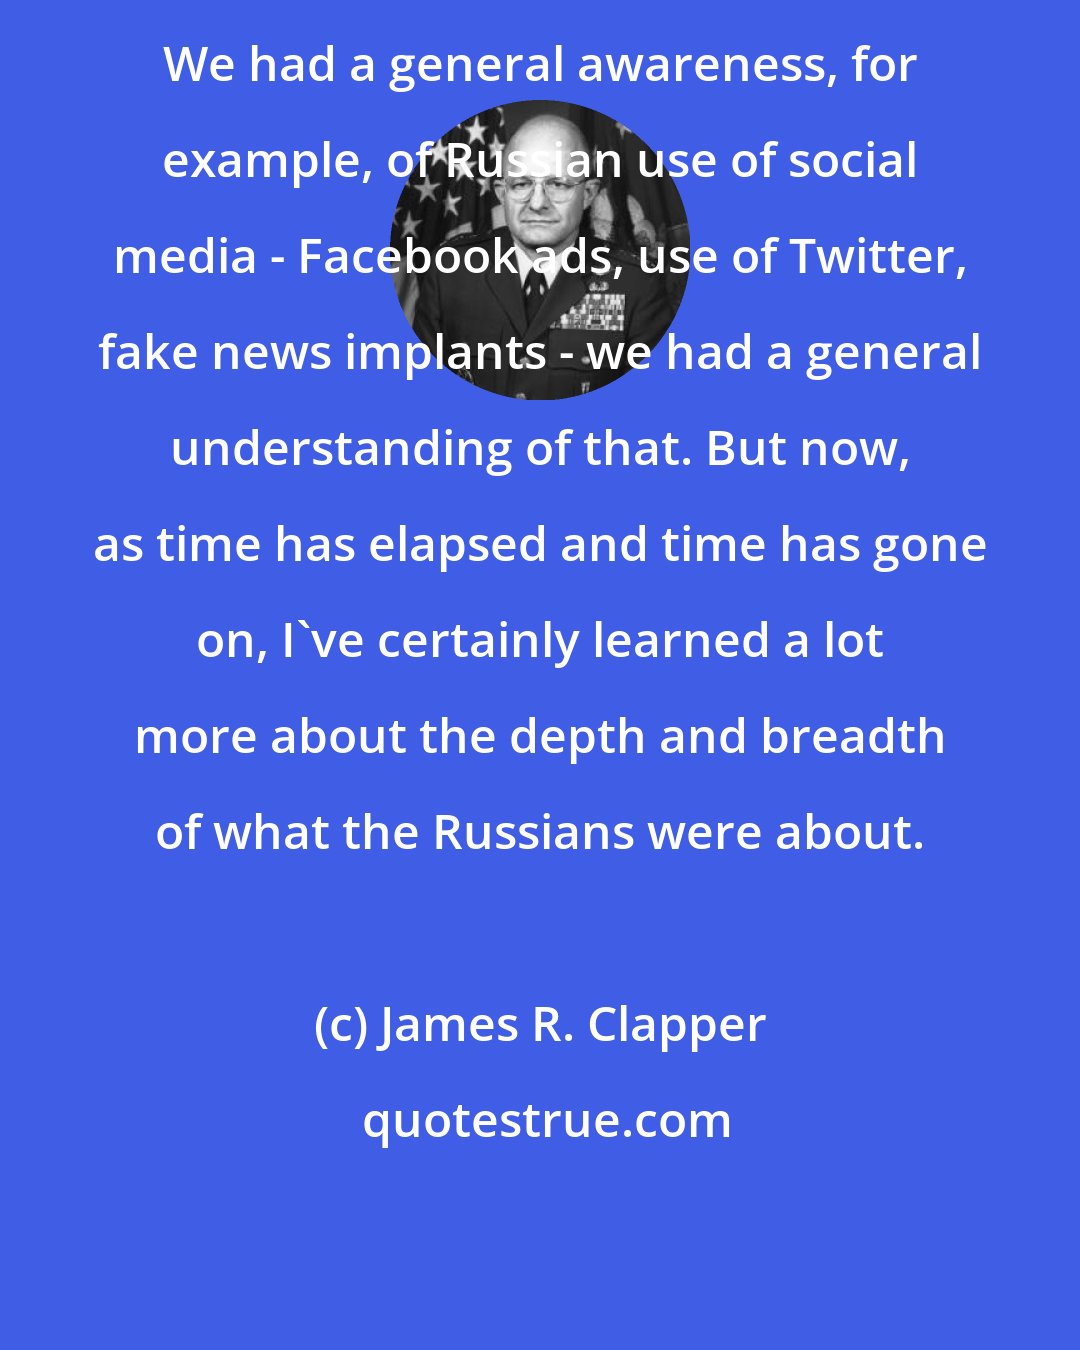 James R. Clapper: We had a general awareness, for example, of Russian use of social media - Facebook ads, use of Twitter, fake news implants - we had a general understanding of that. But now, as time has elapsed and time has gone on, I've certainly learned a lot more about the depth and breadth of what the Russians were about.